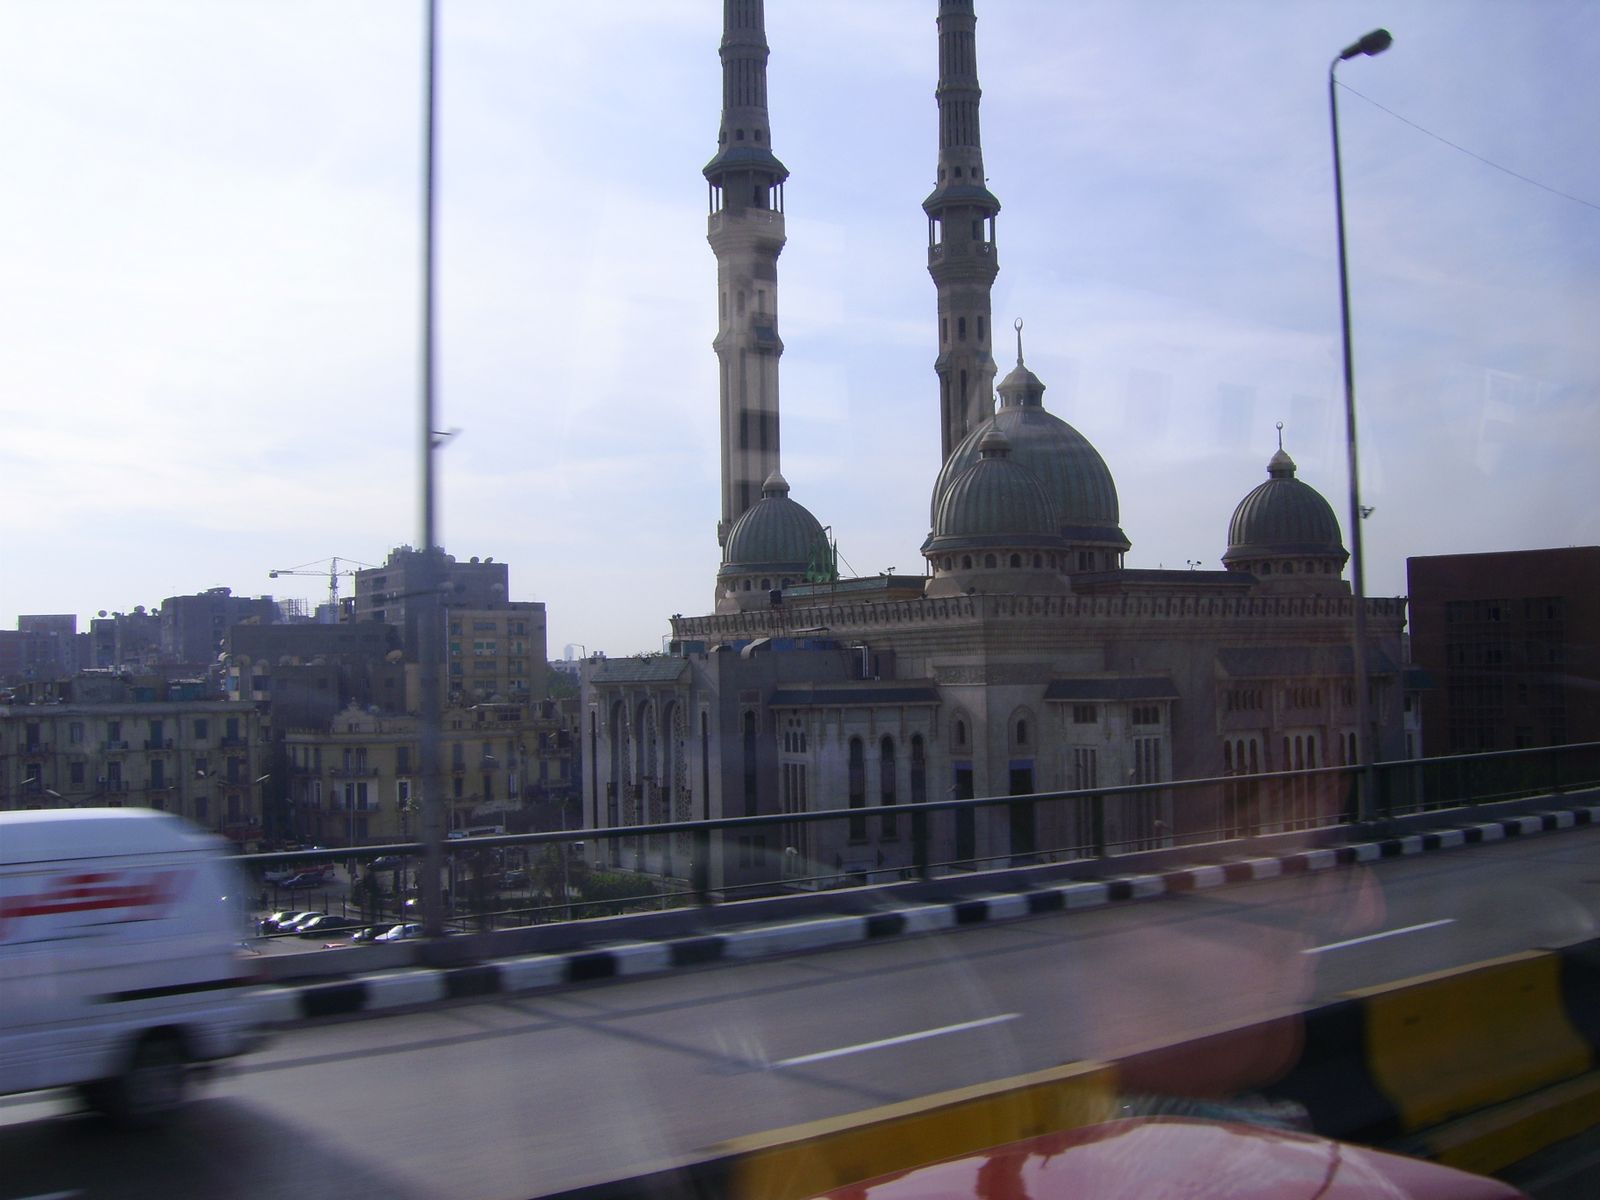 [Mosque+viewed+from+bus+on+Ring+Road+11-27-07.jpg]